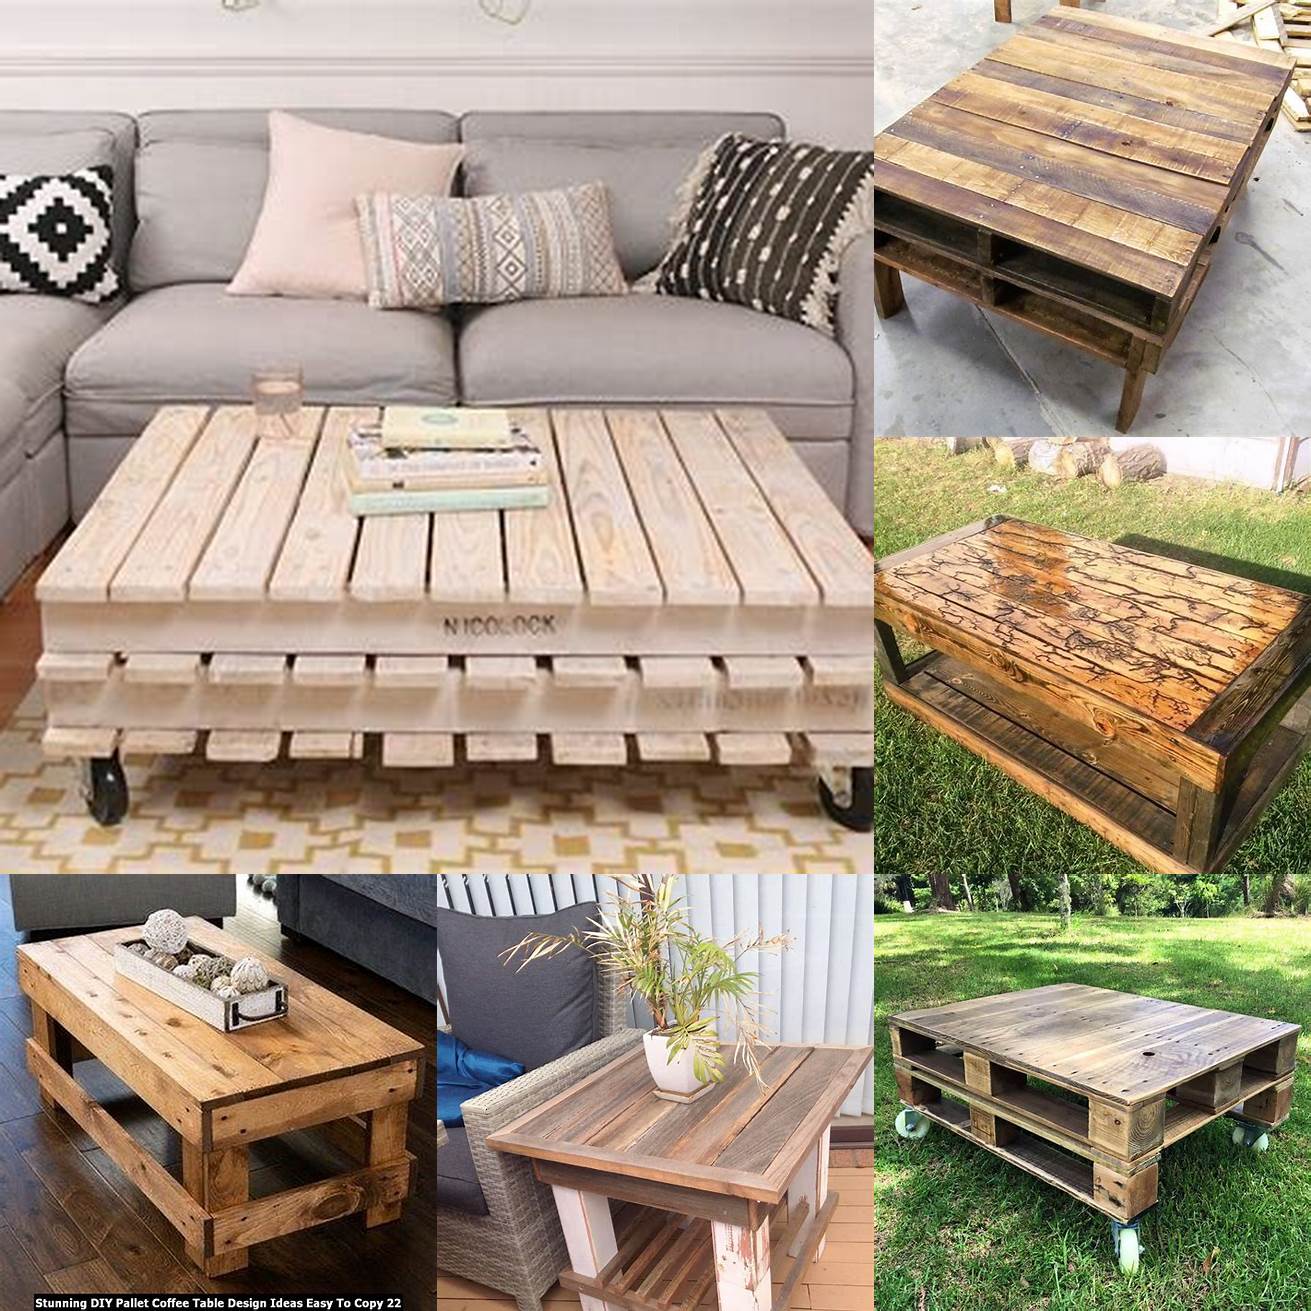 Create a pallet coffee table Use wooden pallets to create a unique and rustic coffee table